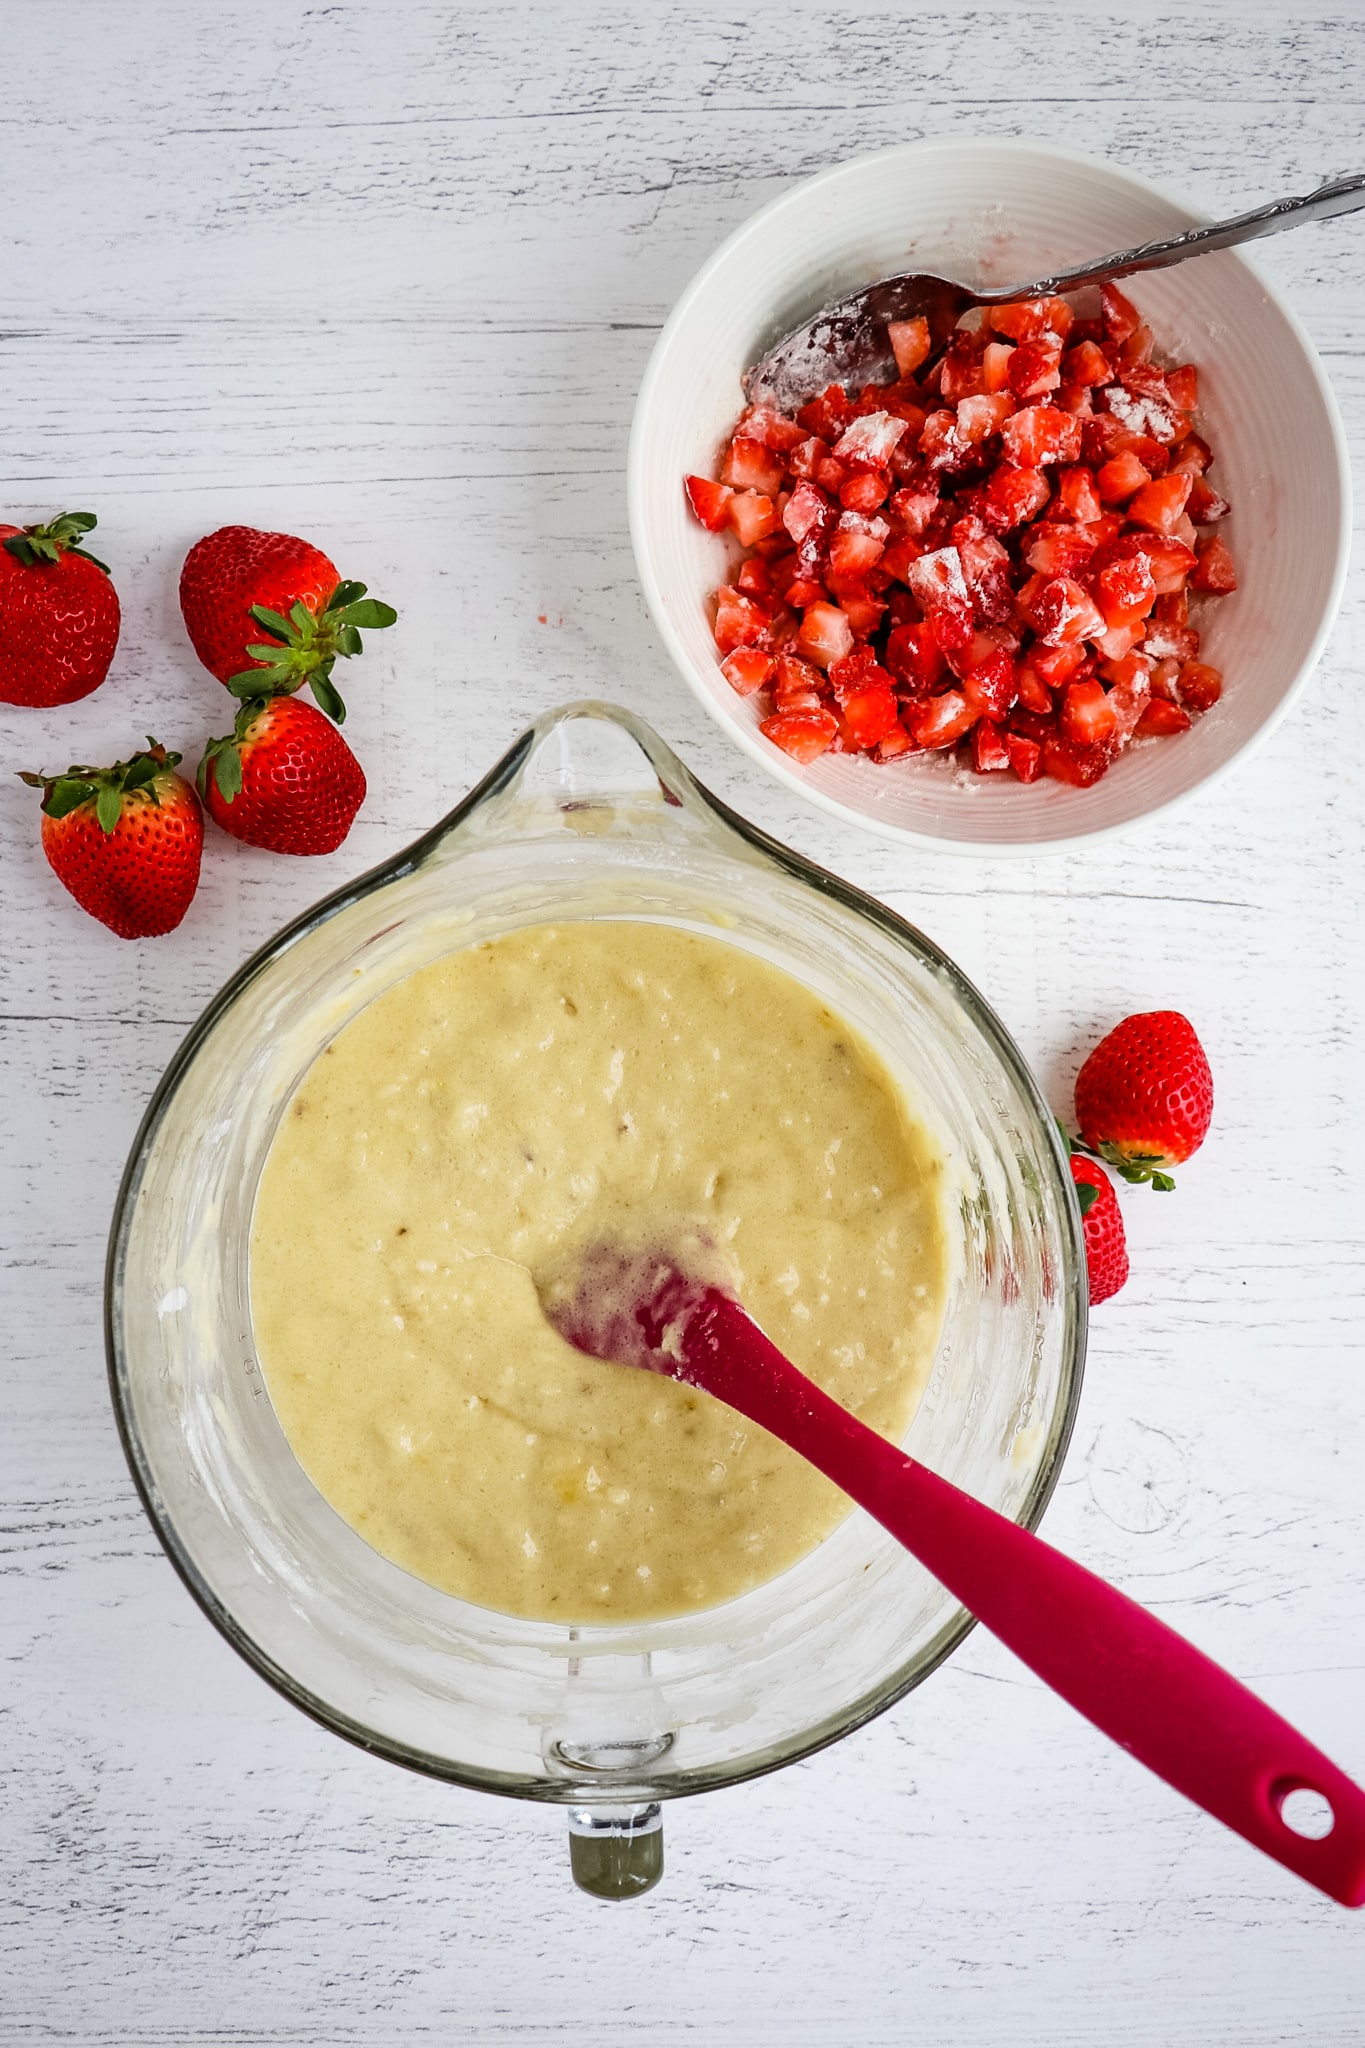 Bowls of banana bread batter and diced strawberries for strawberry banana bread.